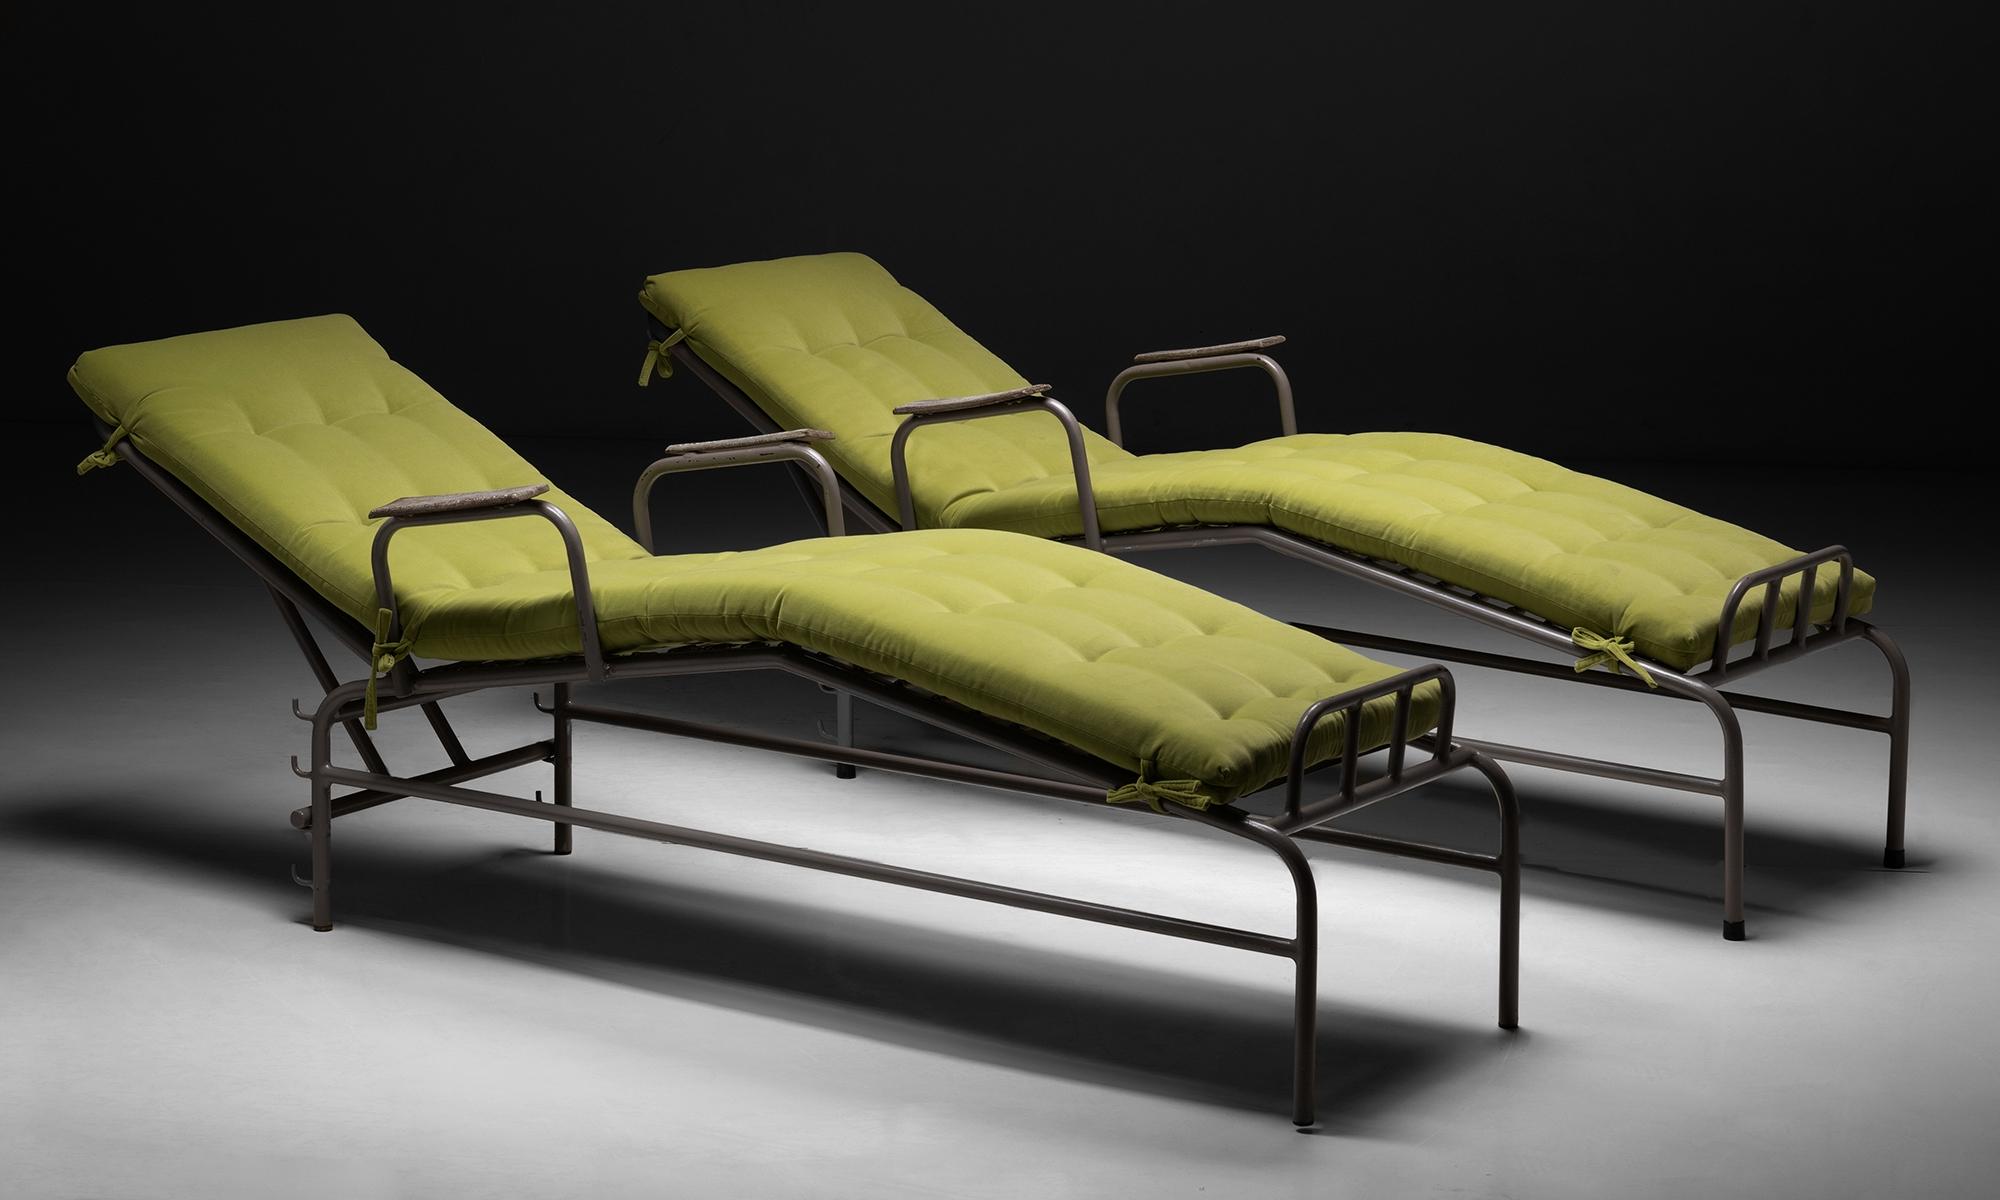 Modernist Chaise Lounge

France circa 1950

Original frame and cushions recently upholstered in 100% polyester by Pierre Frey.

Measures: 28.25” L x 75.75” D x 41.5” H x 18.75”seat

*Please note the price is per unit, and the lounge chairs